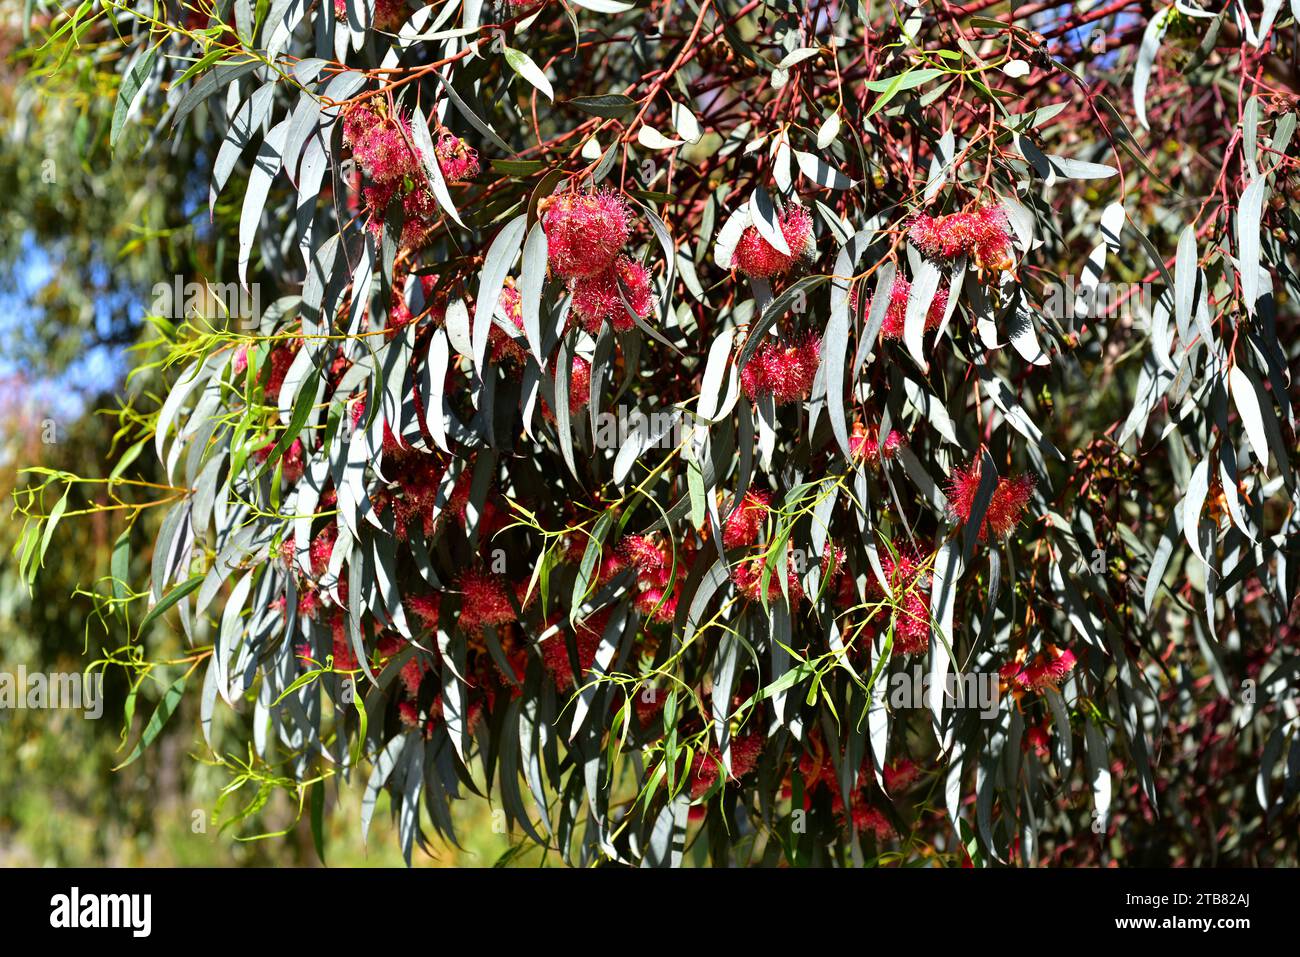 Coral gum or Coolgardie gum (Eucalyptus torquata) is a small tree endemic to western Australia. Flowers and leaves detail. Stock Photo